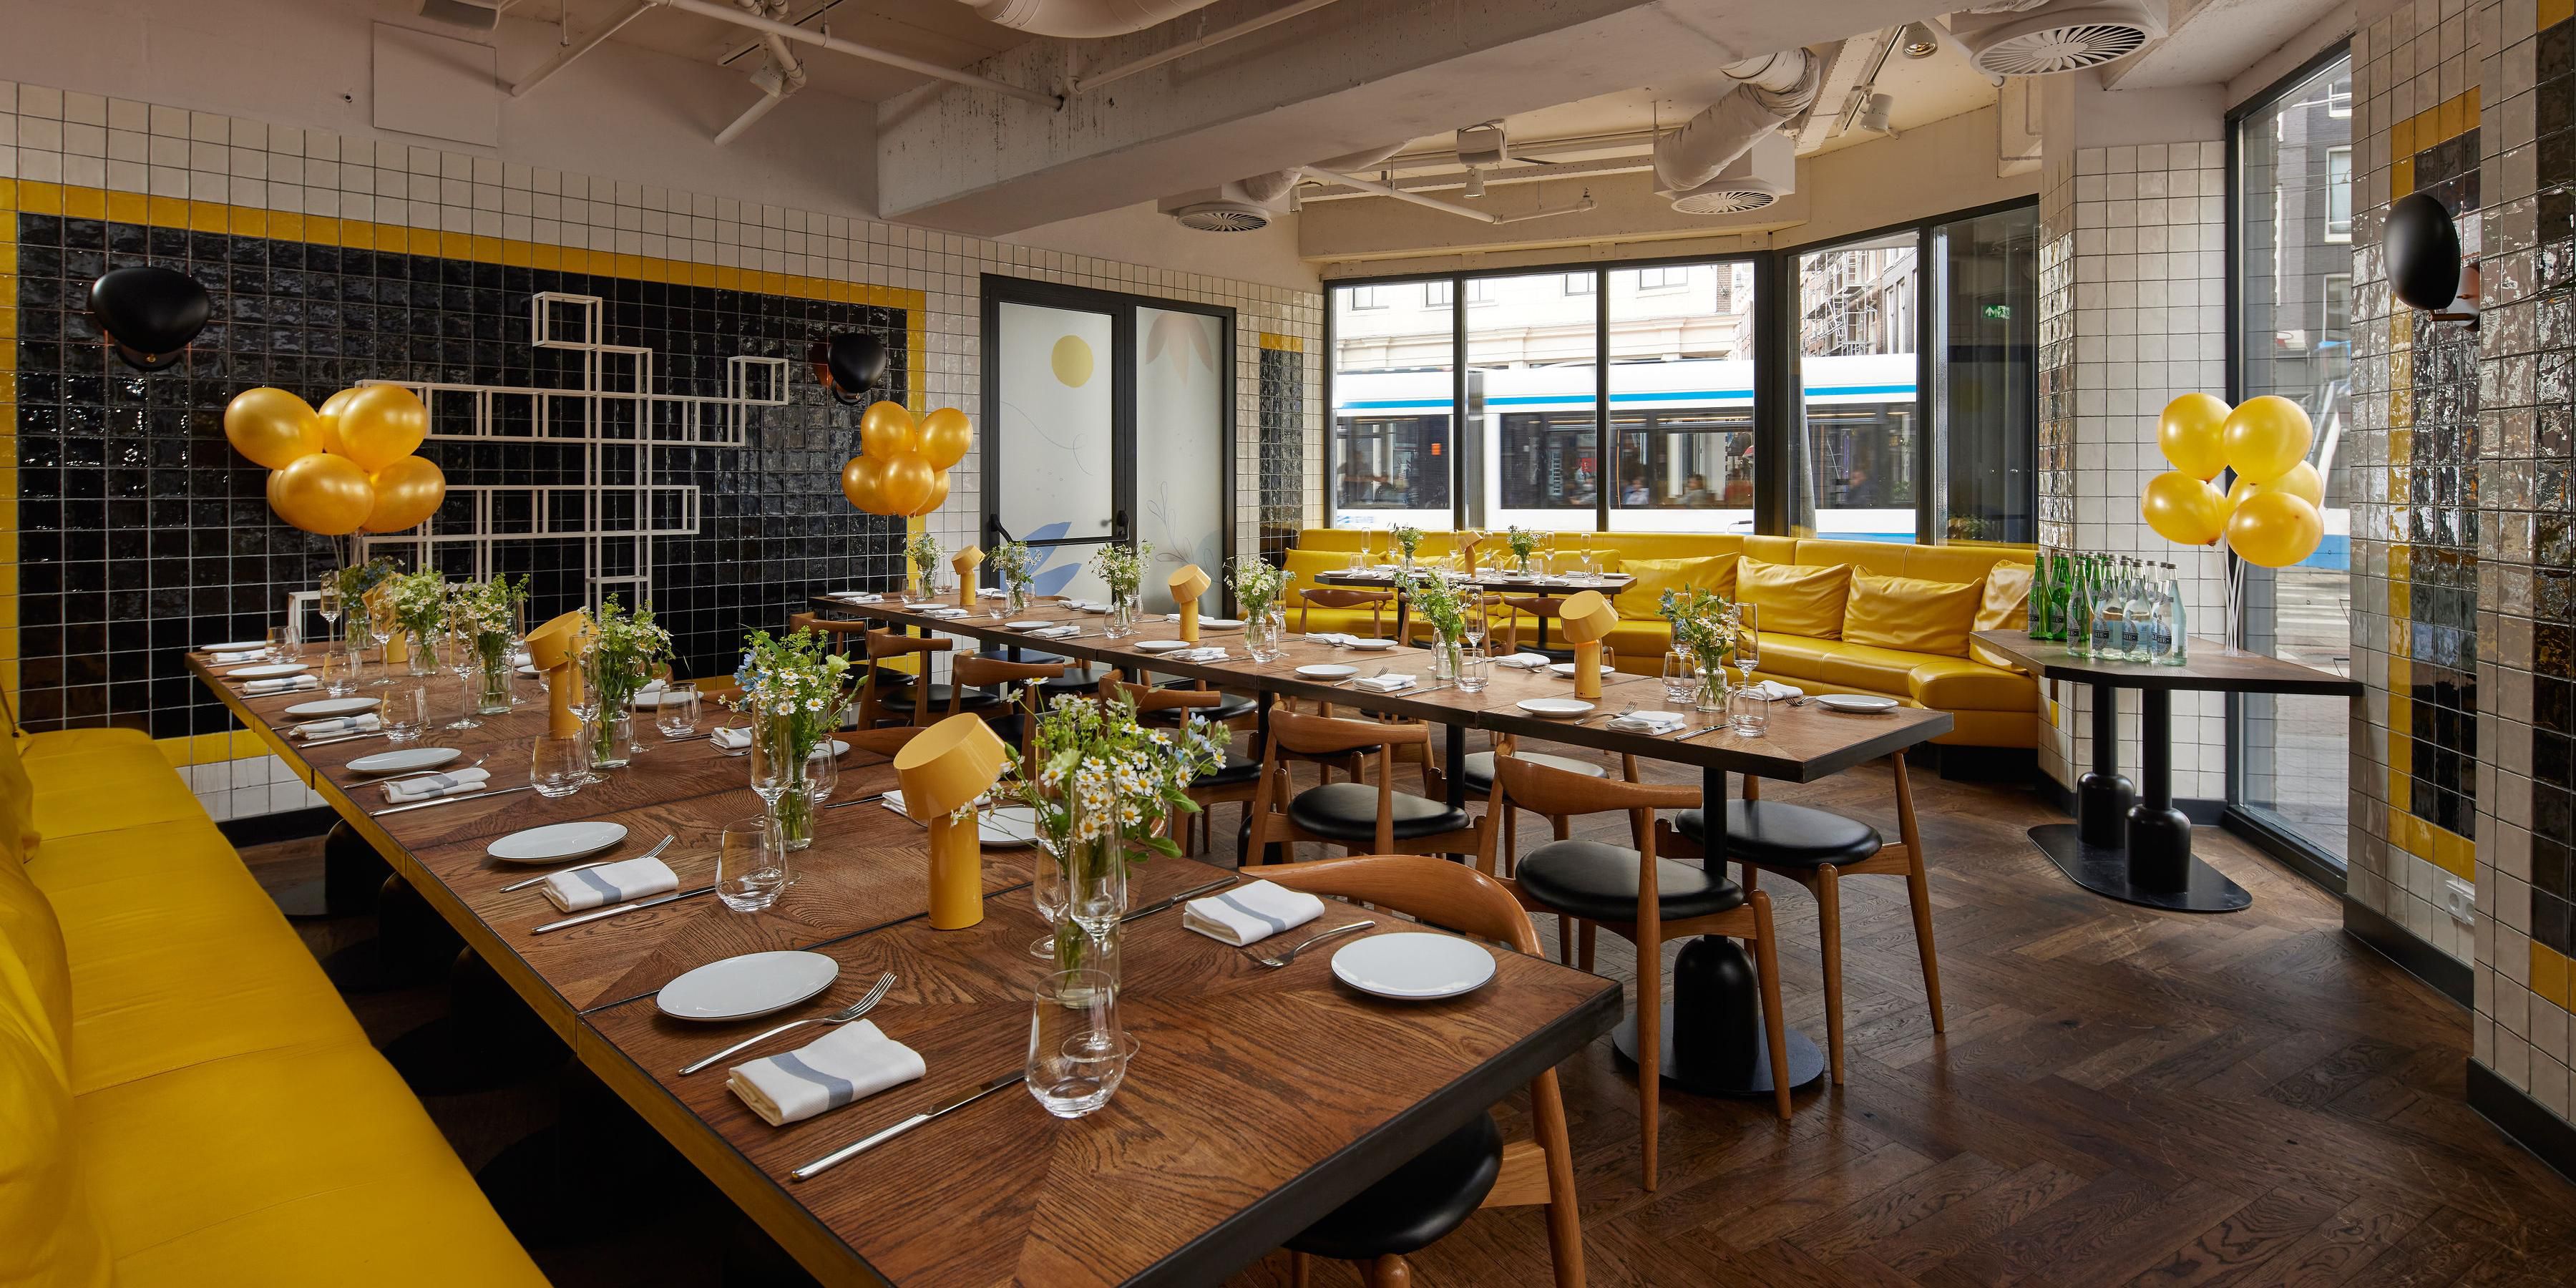 Discover the 3 private events spaces in Kimpton De Witt. Go for a quirky private dining space in the P.C. Hooft located just a few steps from the restaurant. Celia features one semi private dining area that can accommodate for any occassion. Head over to cocktailbar Super Lyan for receptions, small events and a special living room area.